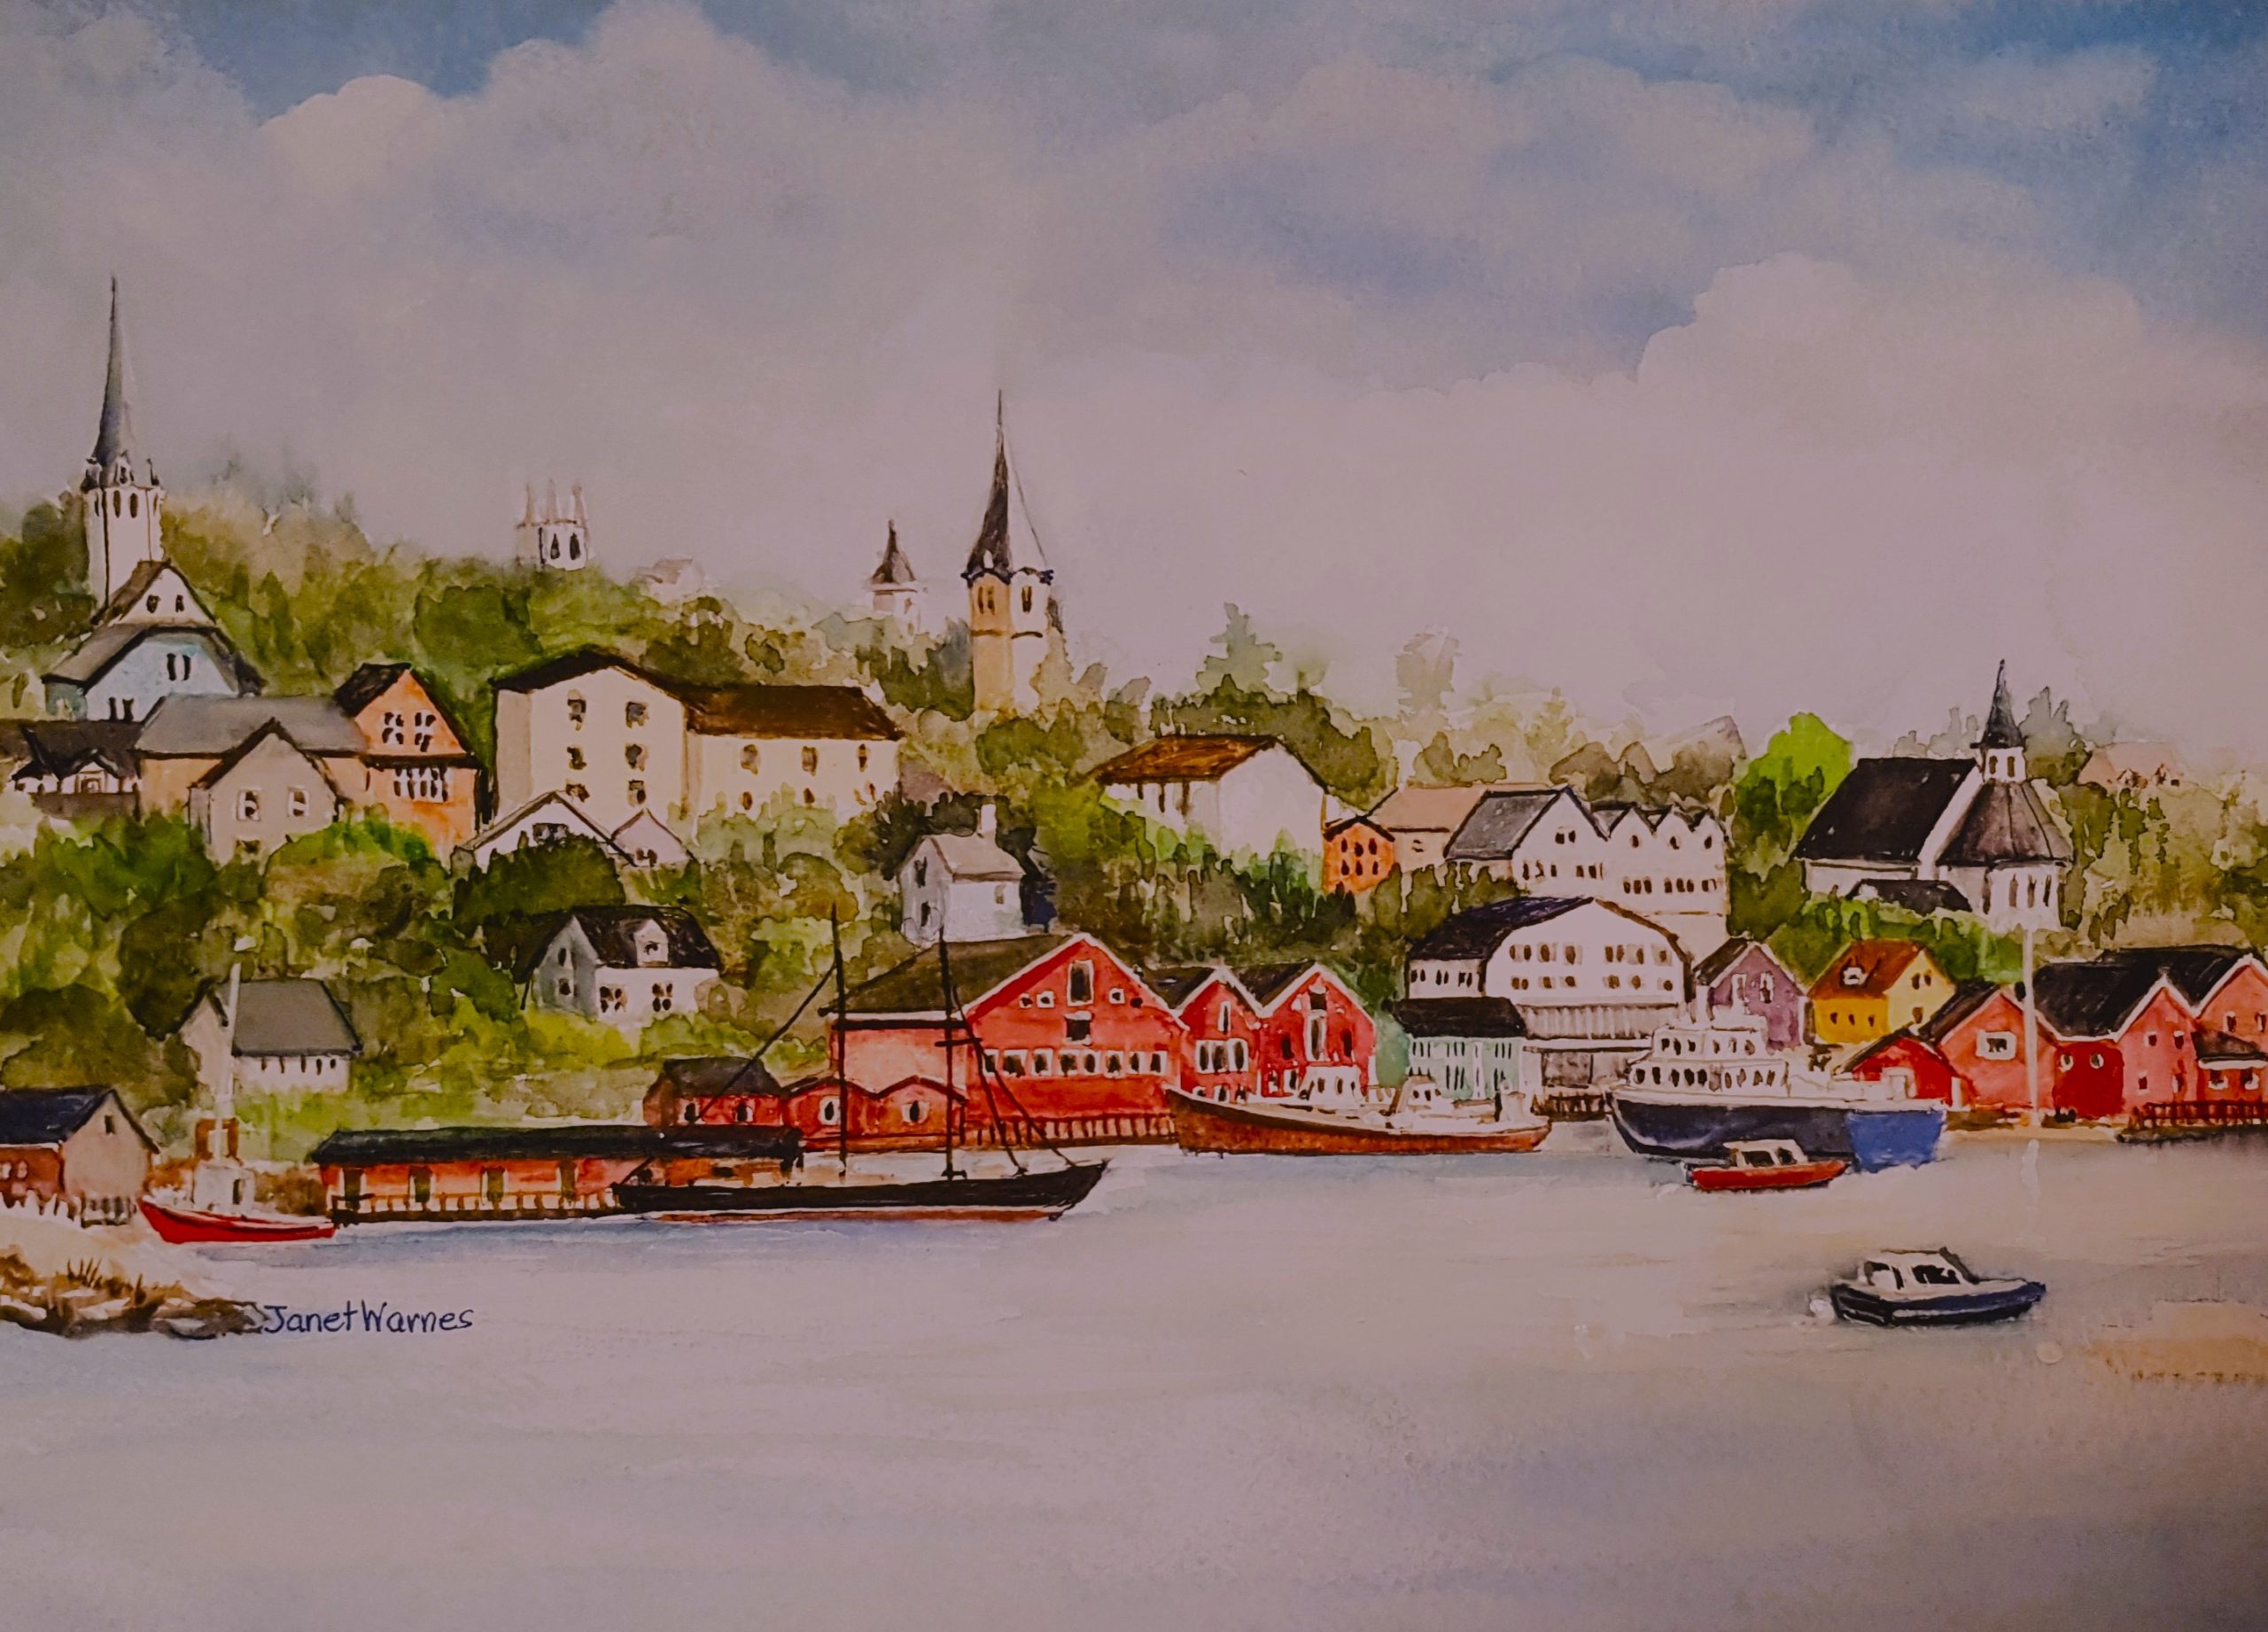 Painting of the Lunenberg waterfront, featuring colourful boats and buildings.